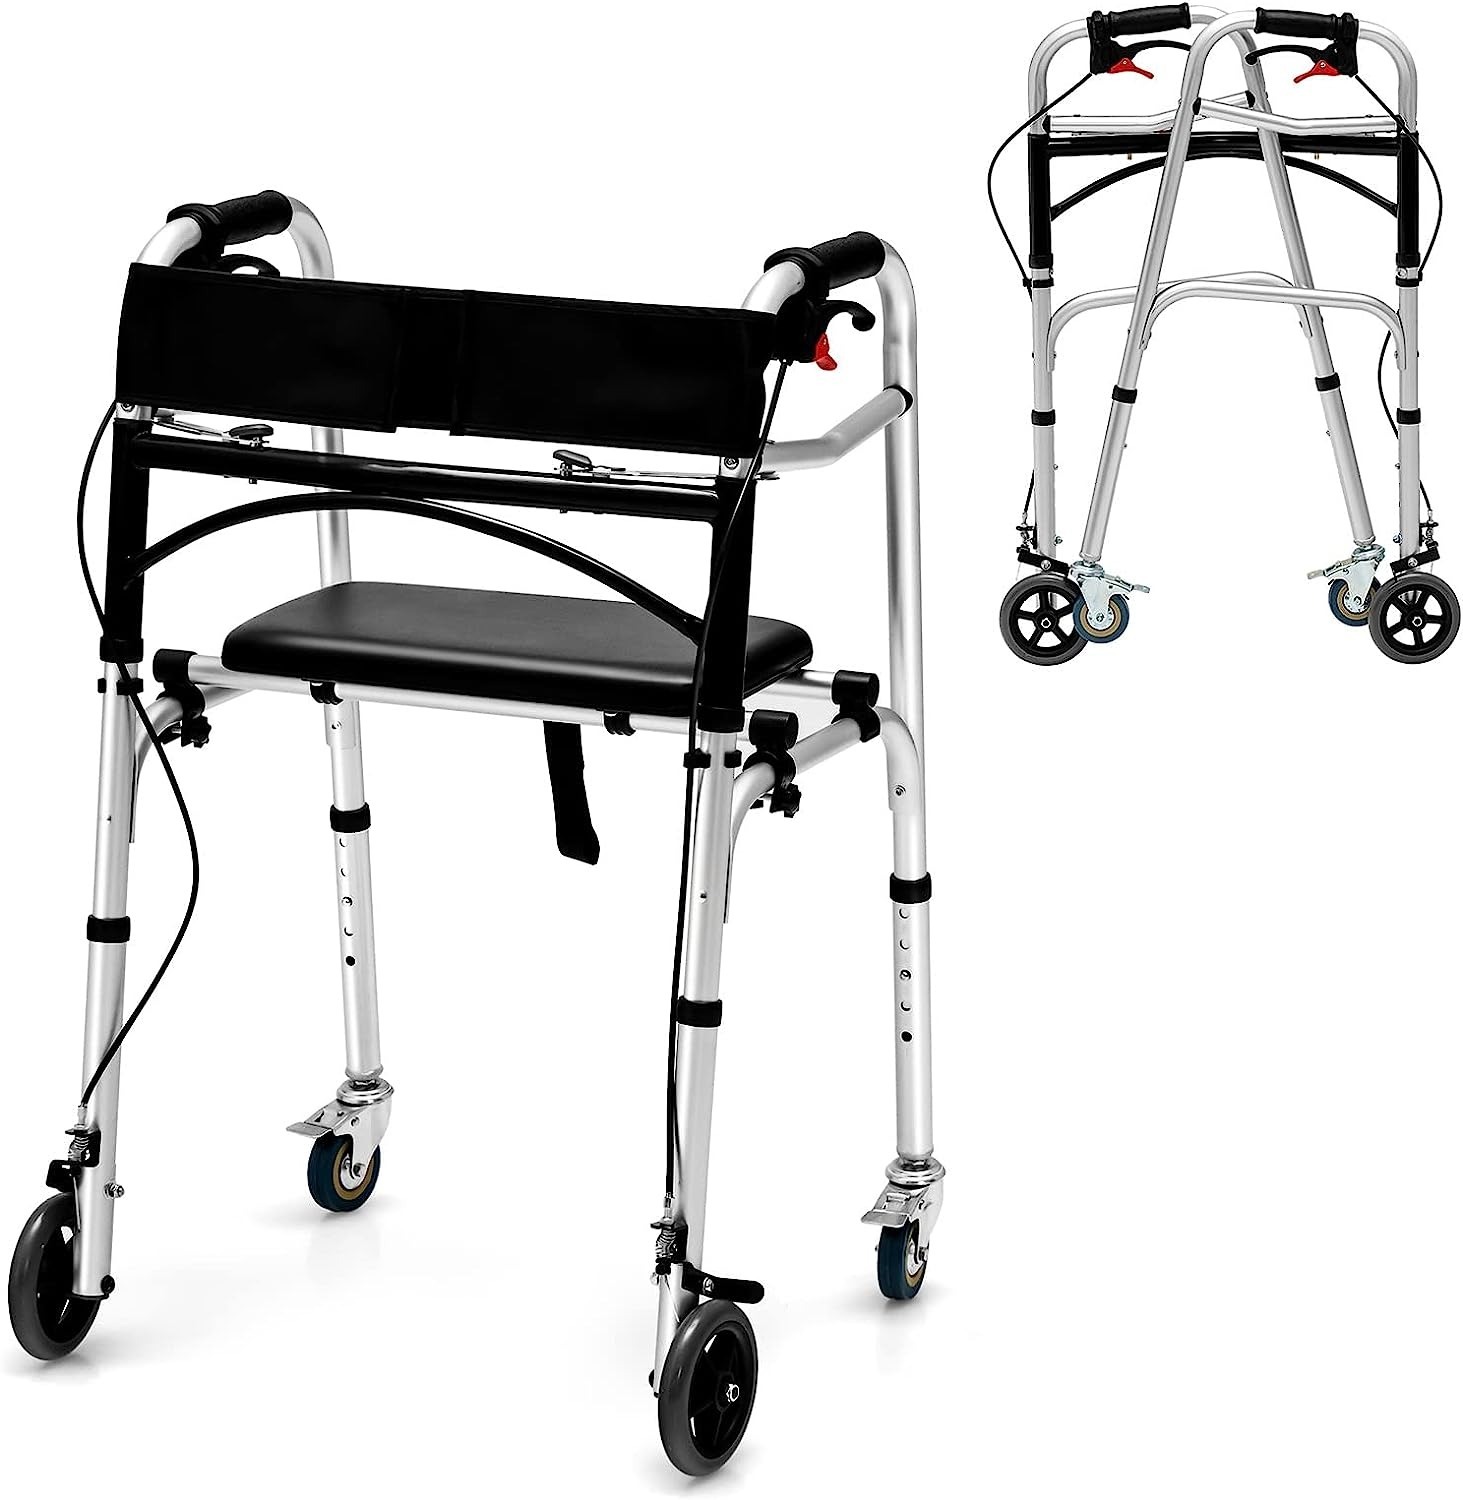 GoPlus 4 in1 Folding Walker w/ Wheels, Detachable Seat, Supports up to 350 lbs $100.79 + Free Shipping